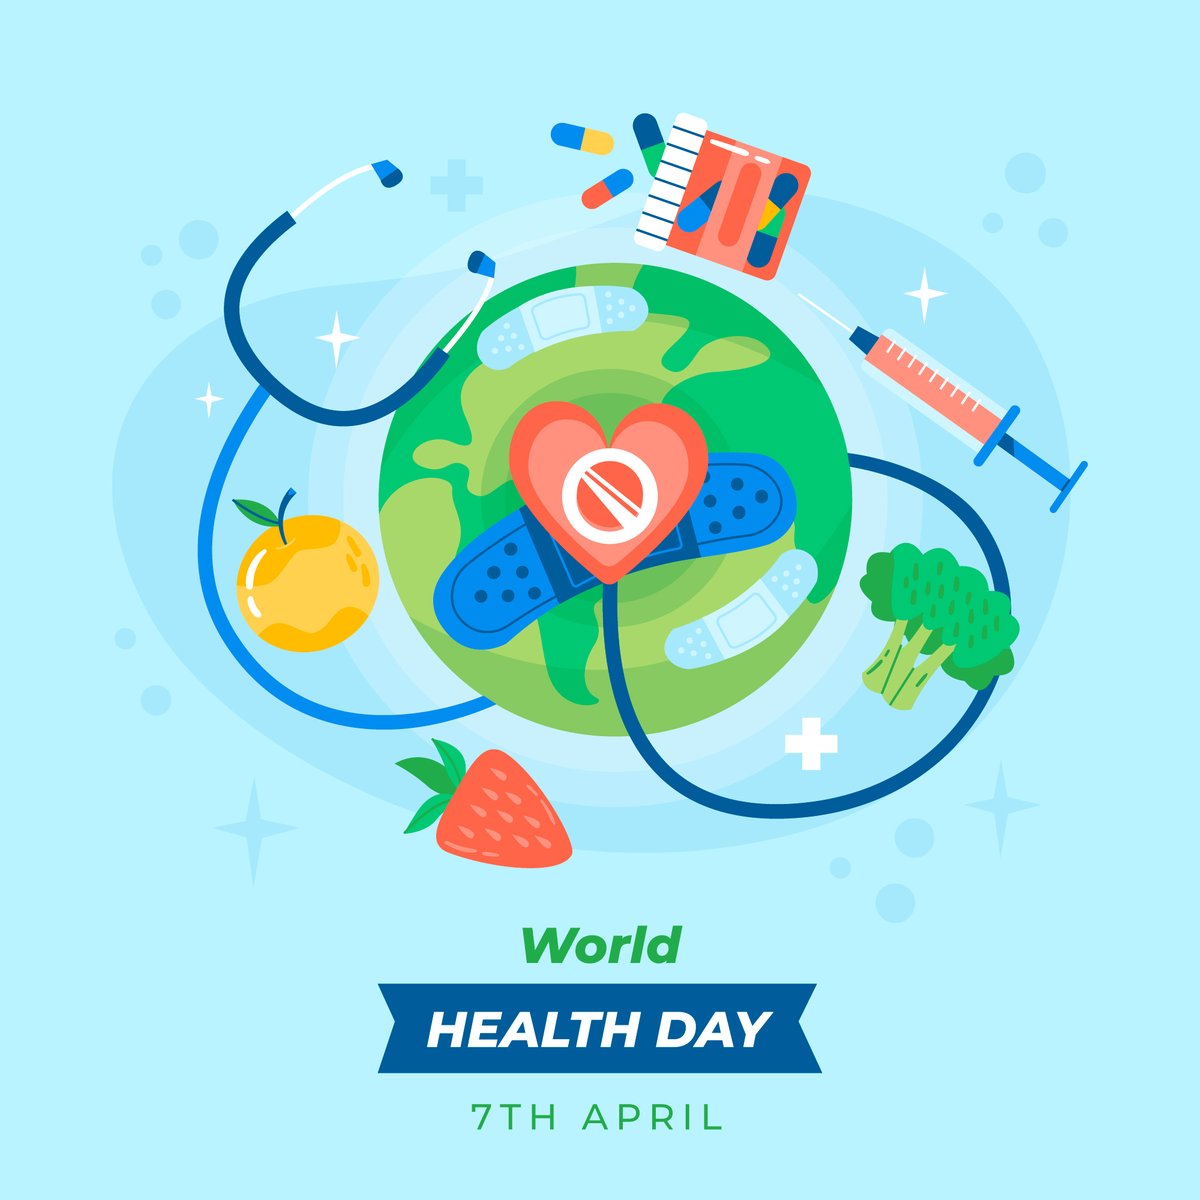 Today is World Health Day! The theme this year is 'My health, my right’ & was chosen to champion the right of everyone, everywhere to have access to quality health services, education, and information... Find out more: bit.ly/3VRQ6Uy